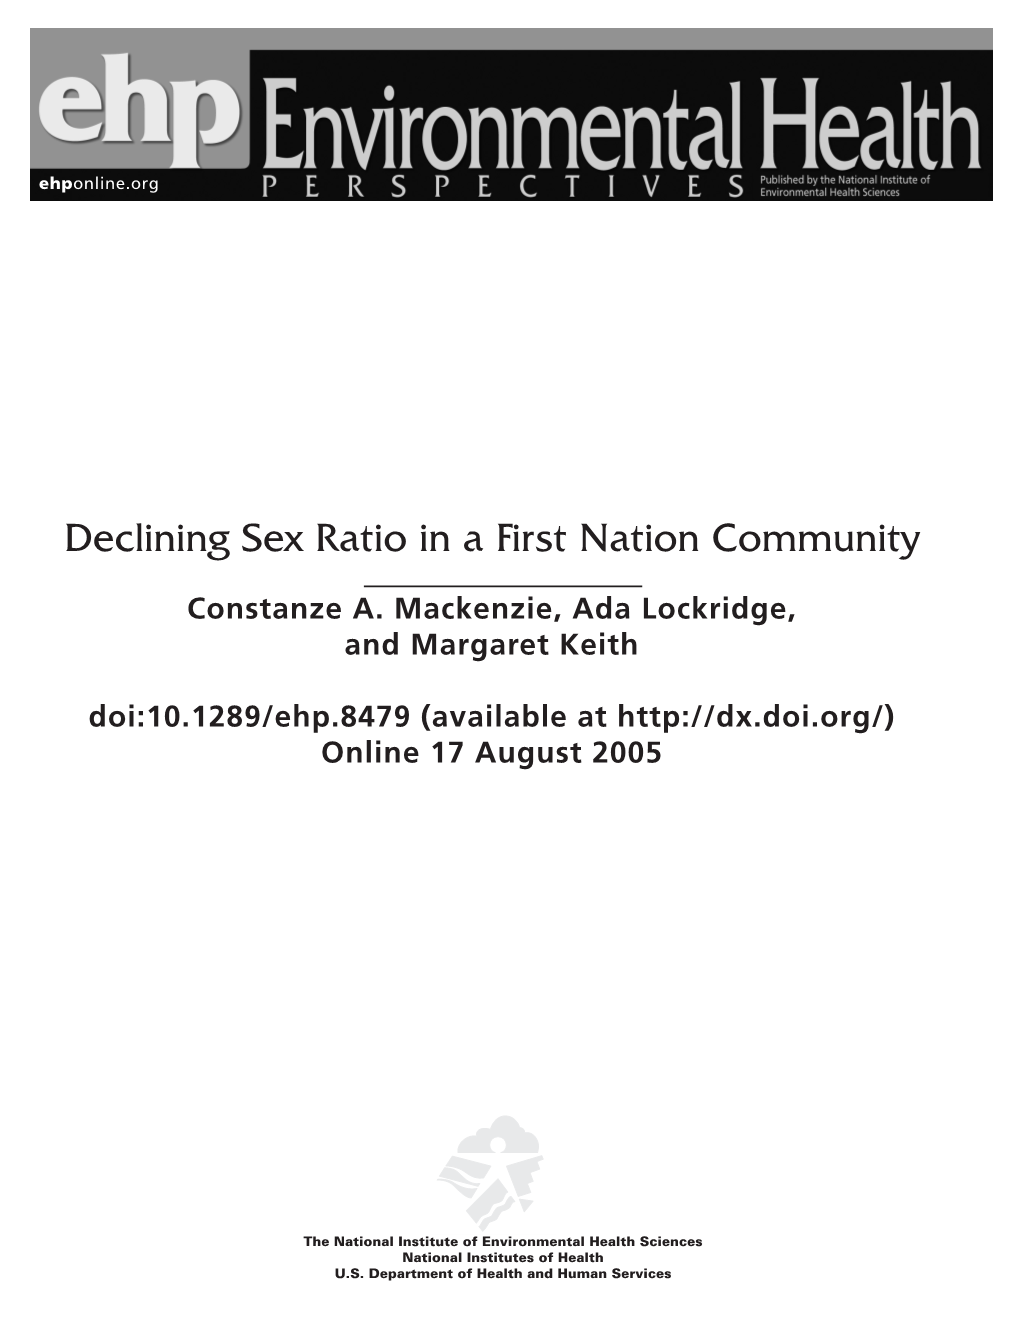 Declining Sex Ratio in a First Nation Community